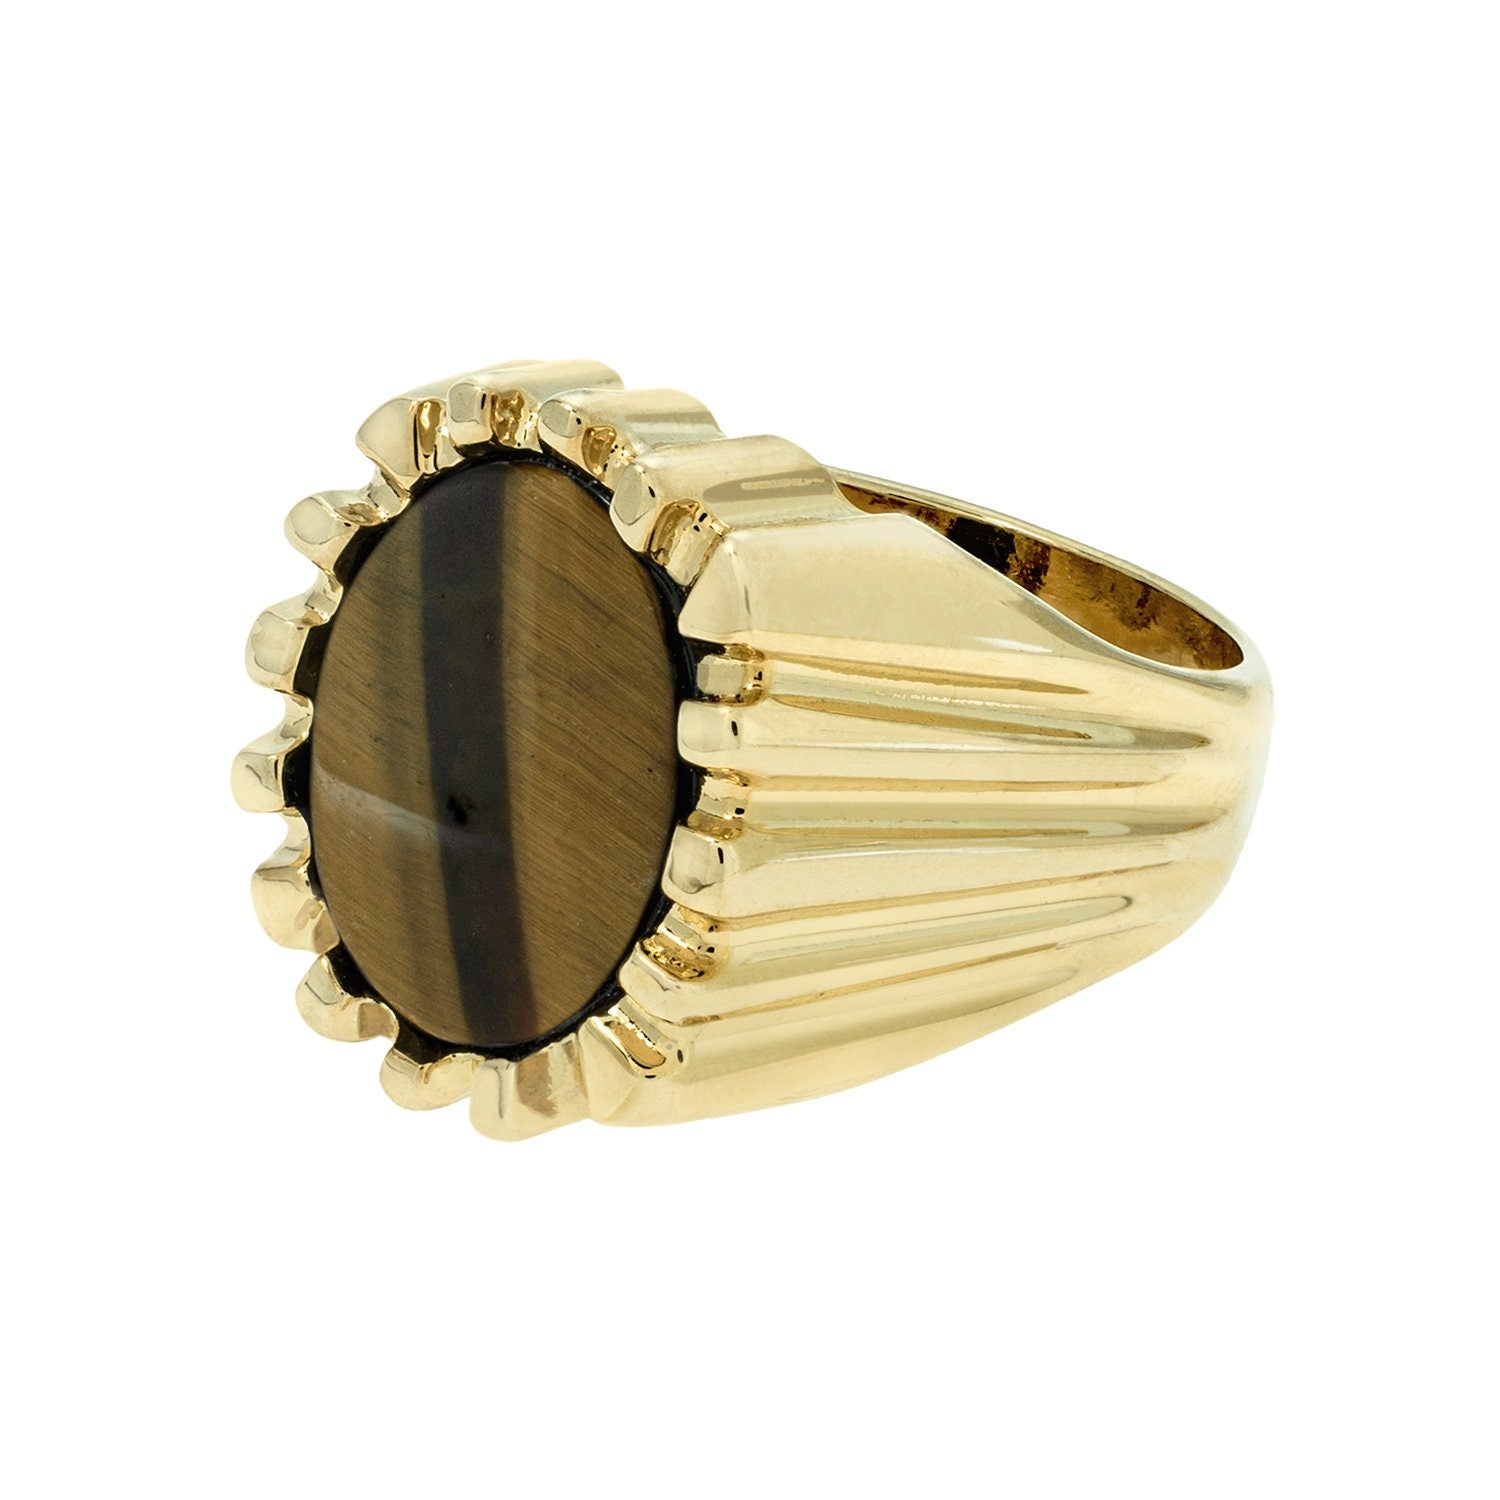 Vintage Ring 1980s Mens Genuine Tiger Eye 18kt Gold Plated Ring Unisex Jewelry #R1960 - Limited Stock - Never Worn